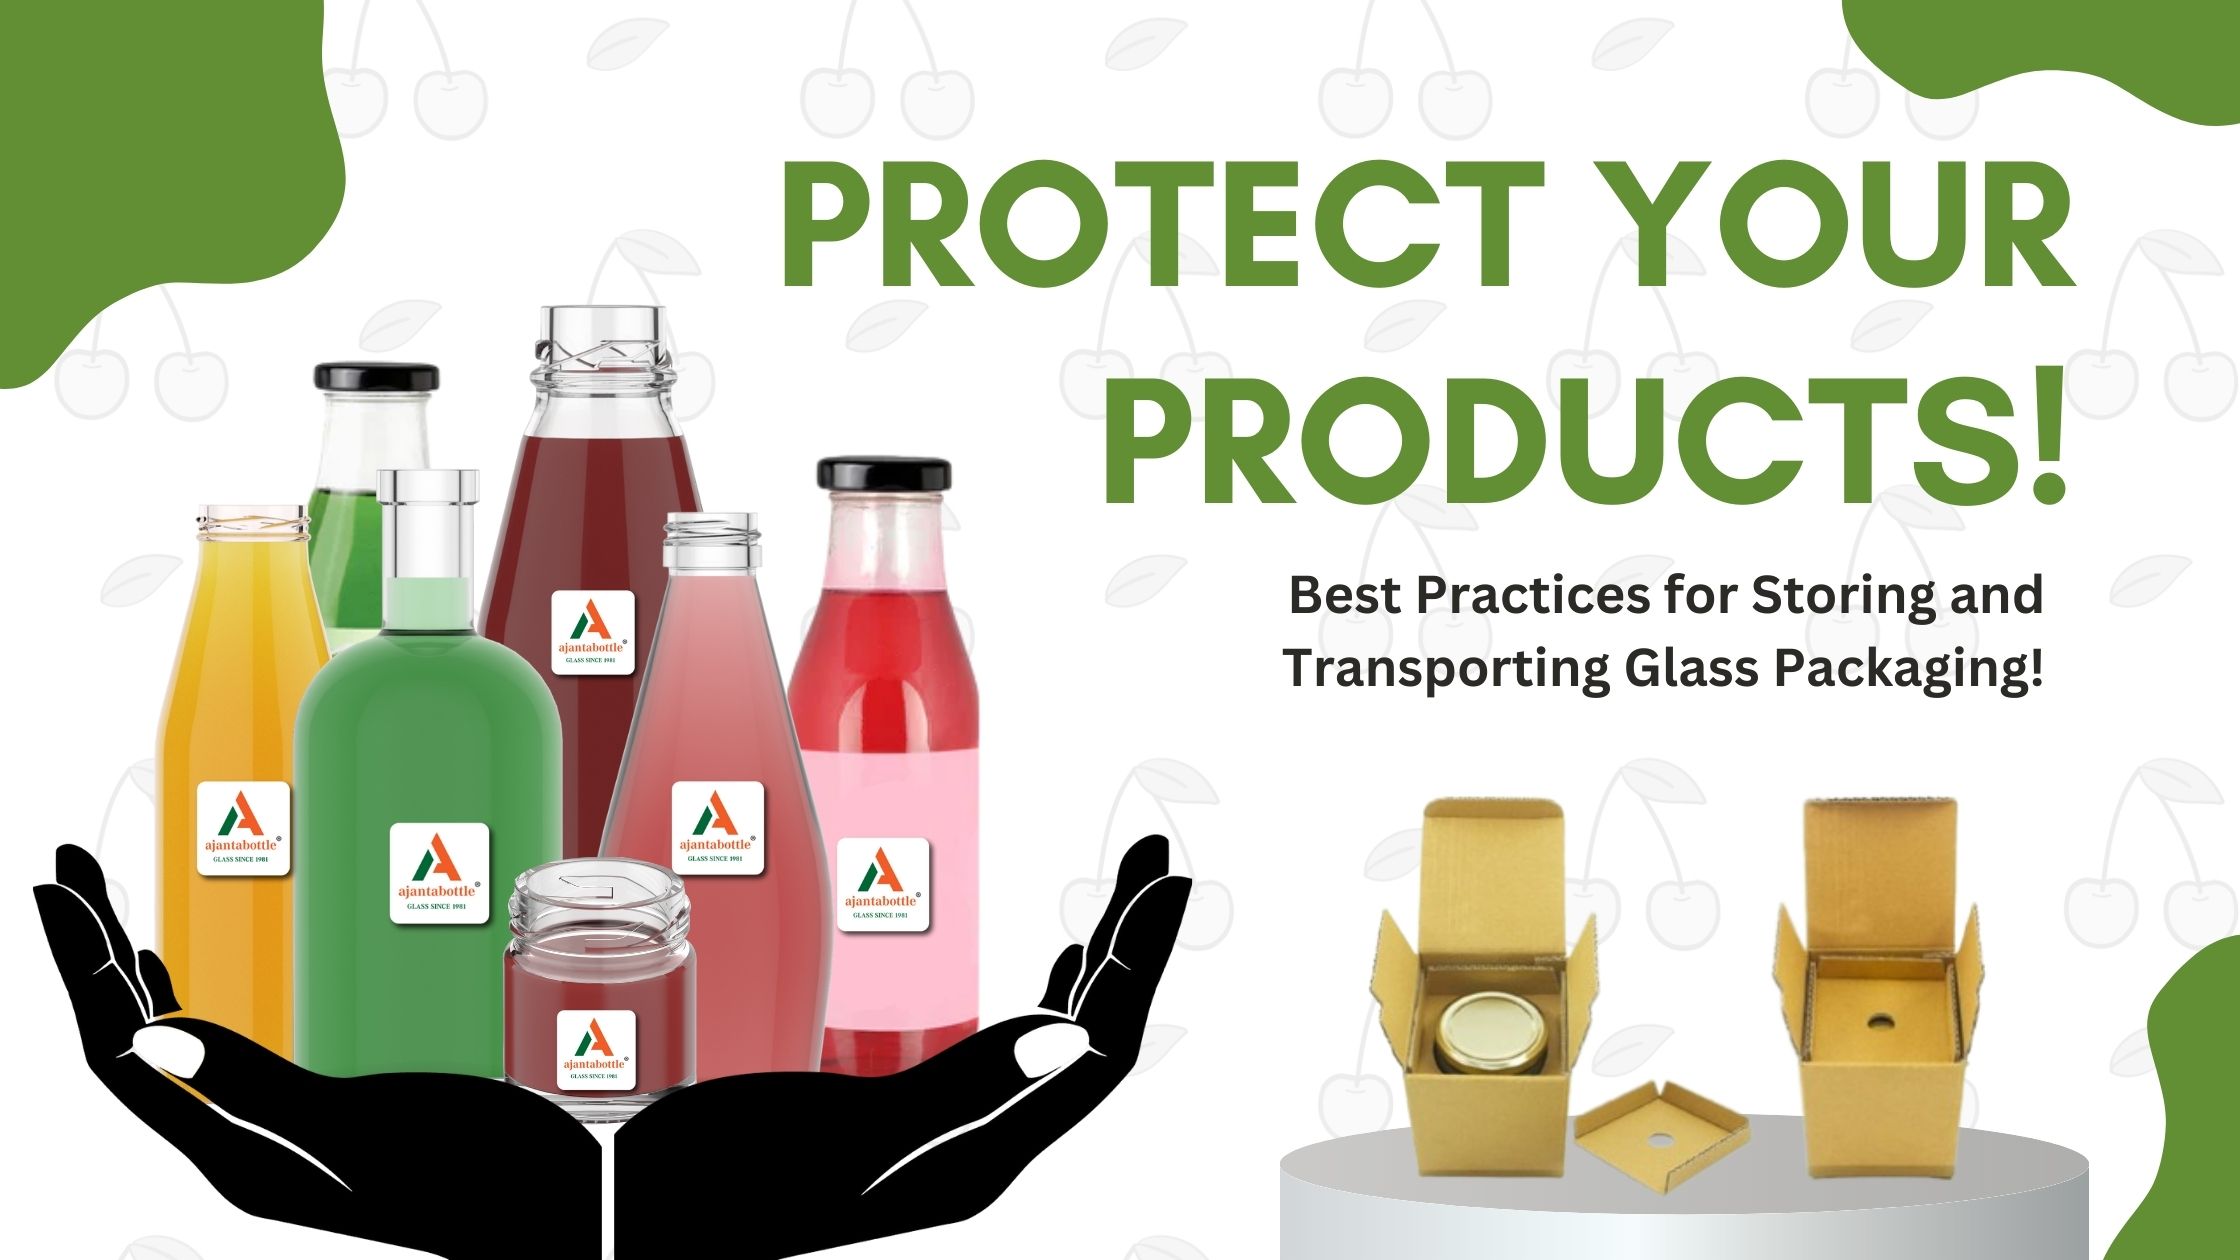 5 Best Practices for Storing Glass Packaging Properly